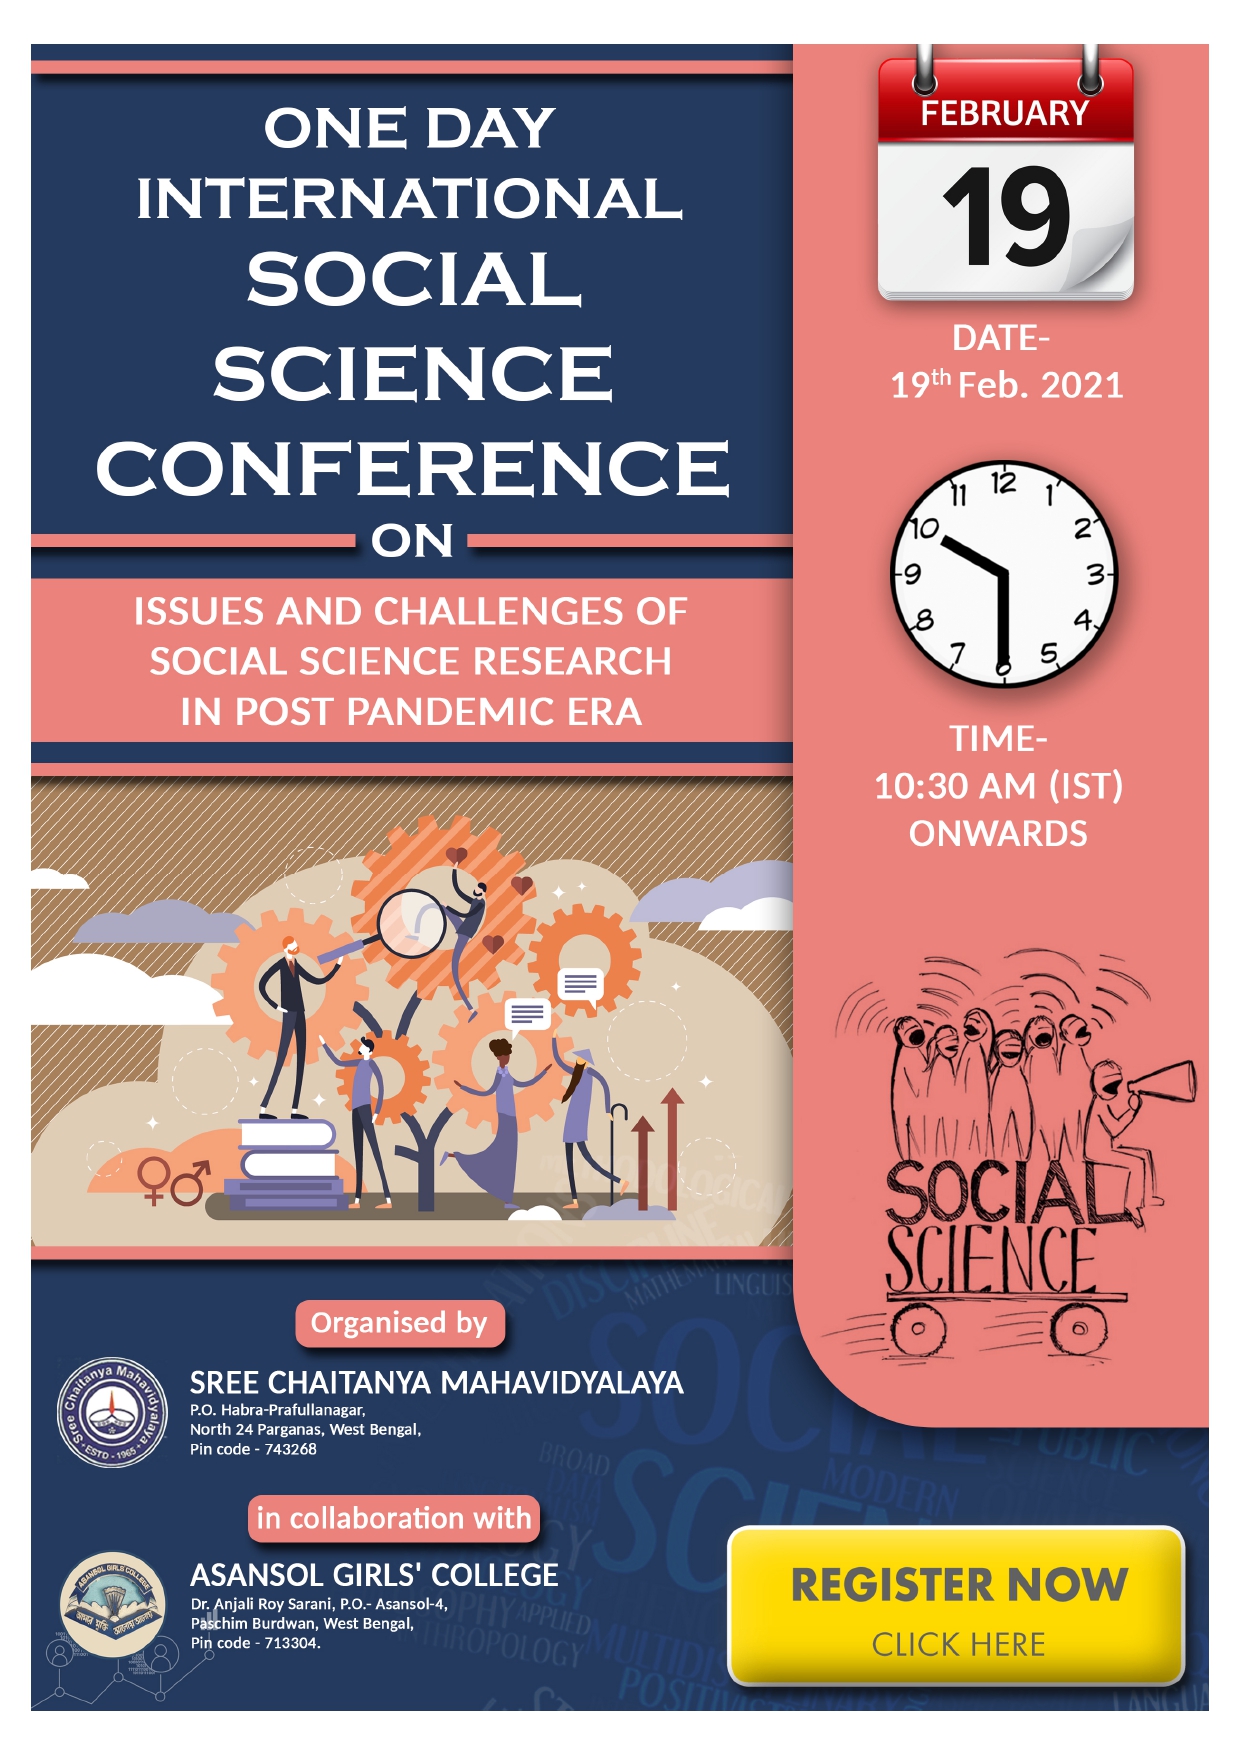 One Day International Social Science Conference, 19-02-2021